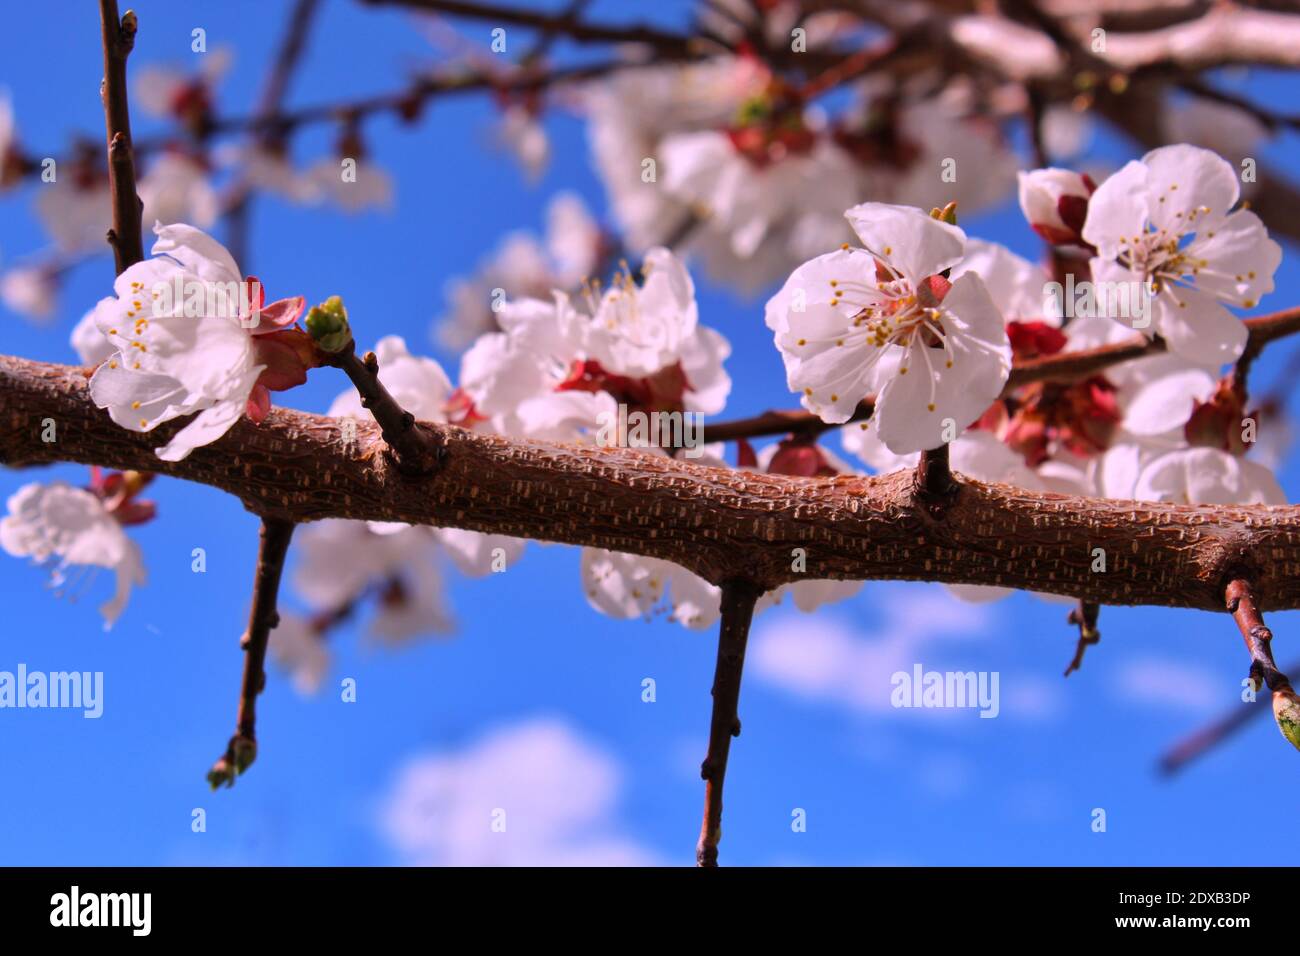 Apricot Tree Branches With A Blooming Apricot Flowers In The Month Of April Stock Photo Alamy